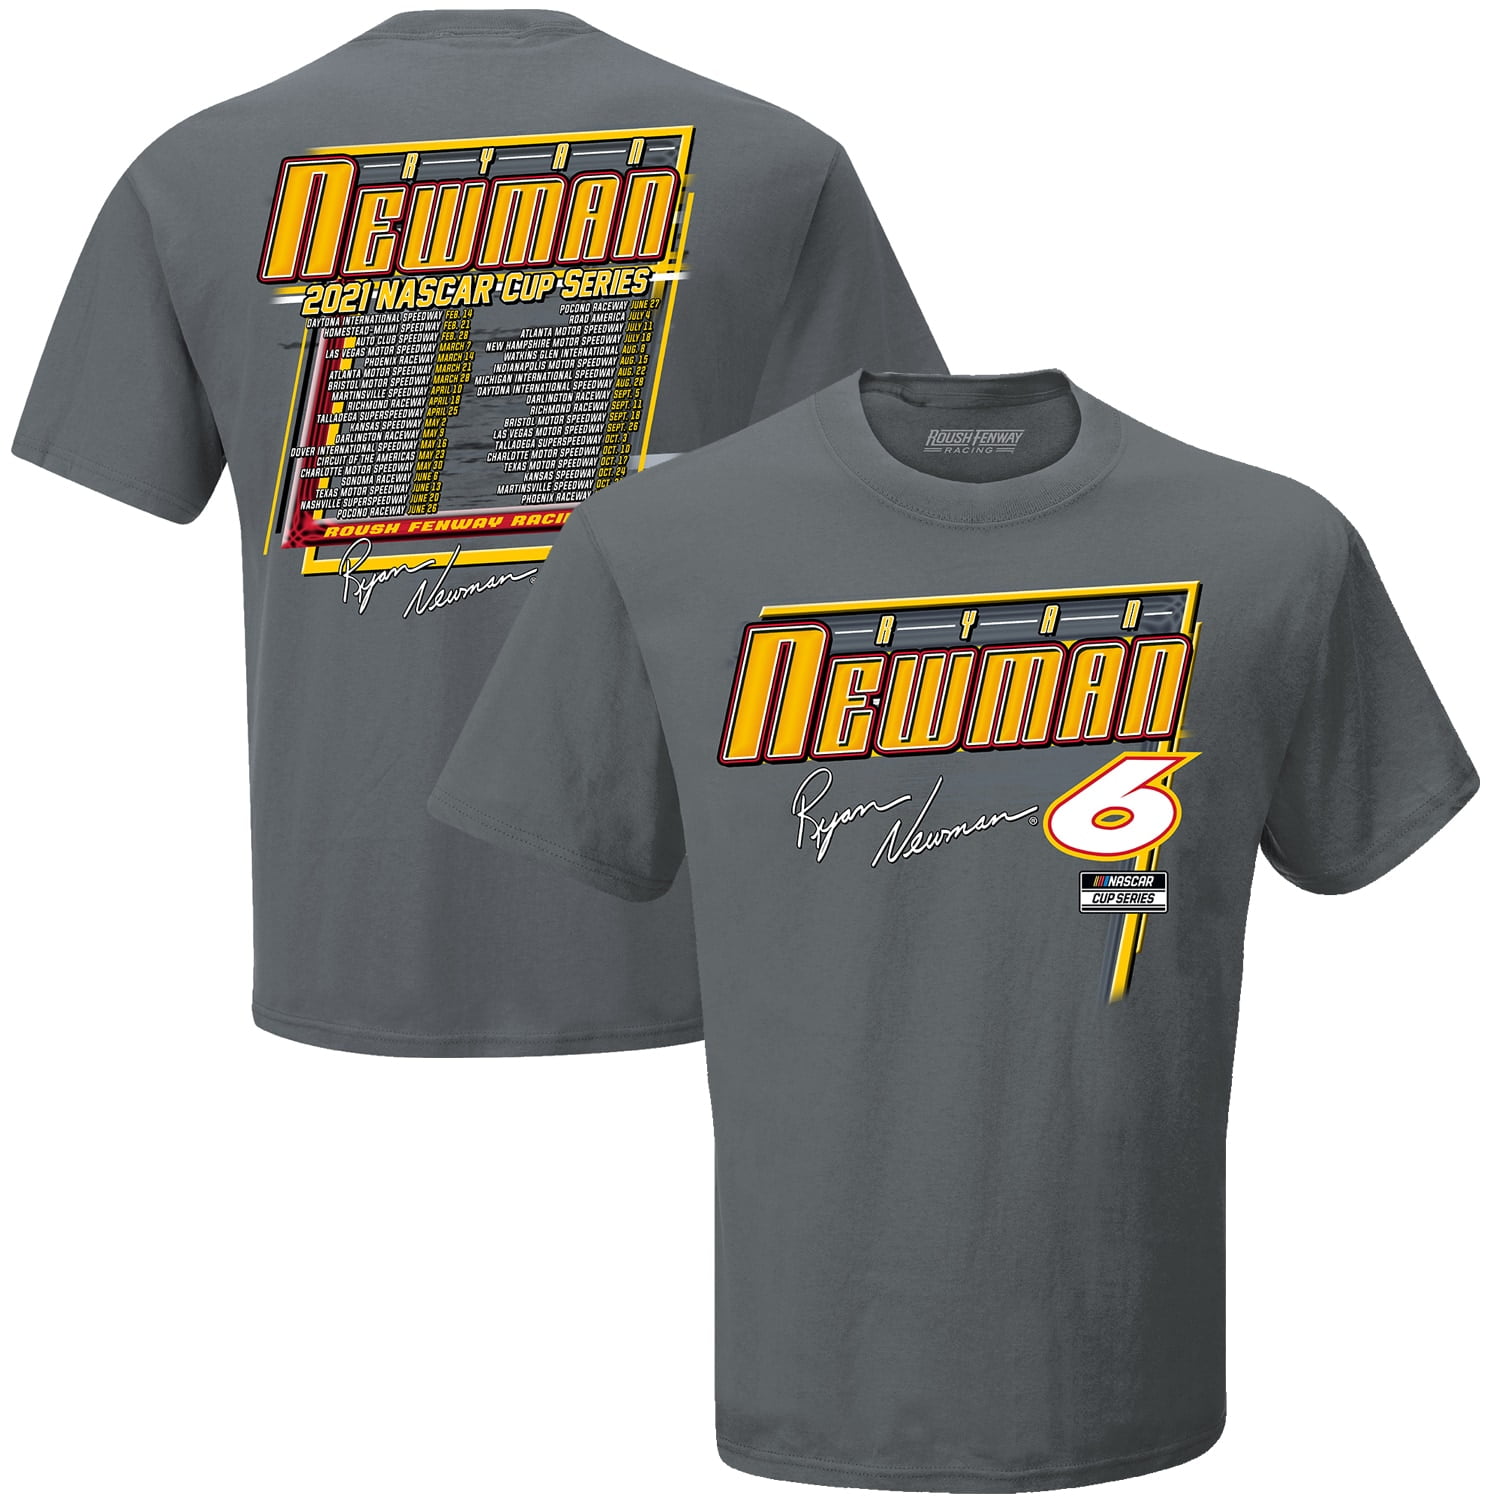 FAST FREE SHIPPING Ryan Newman Motorsports Authentics Chassis T-Shirt 